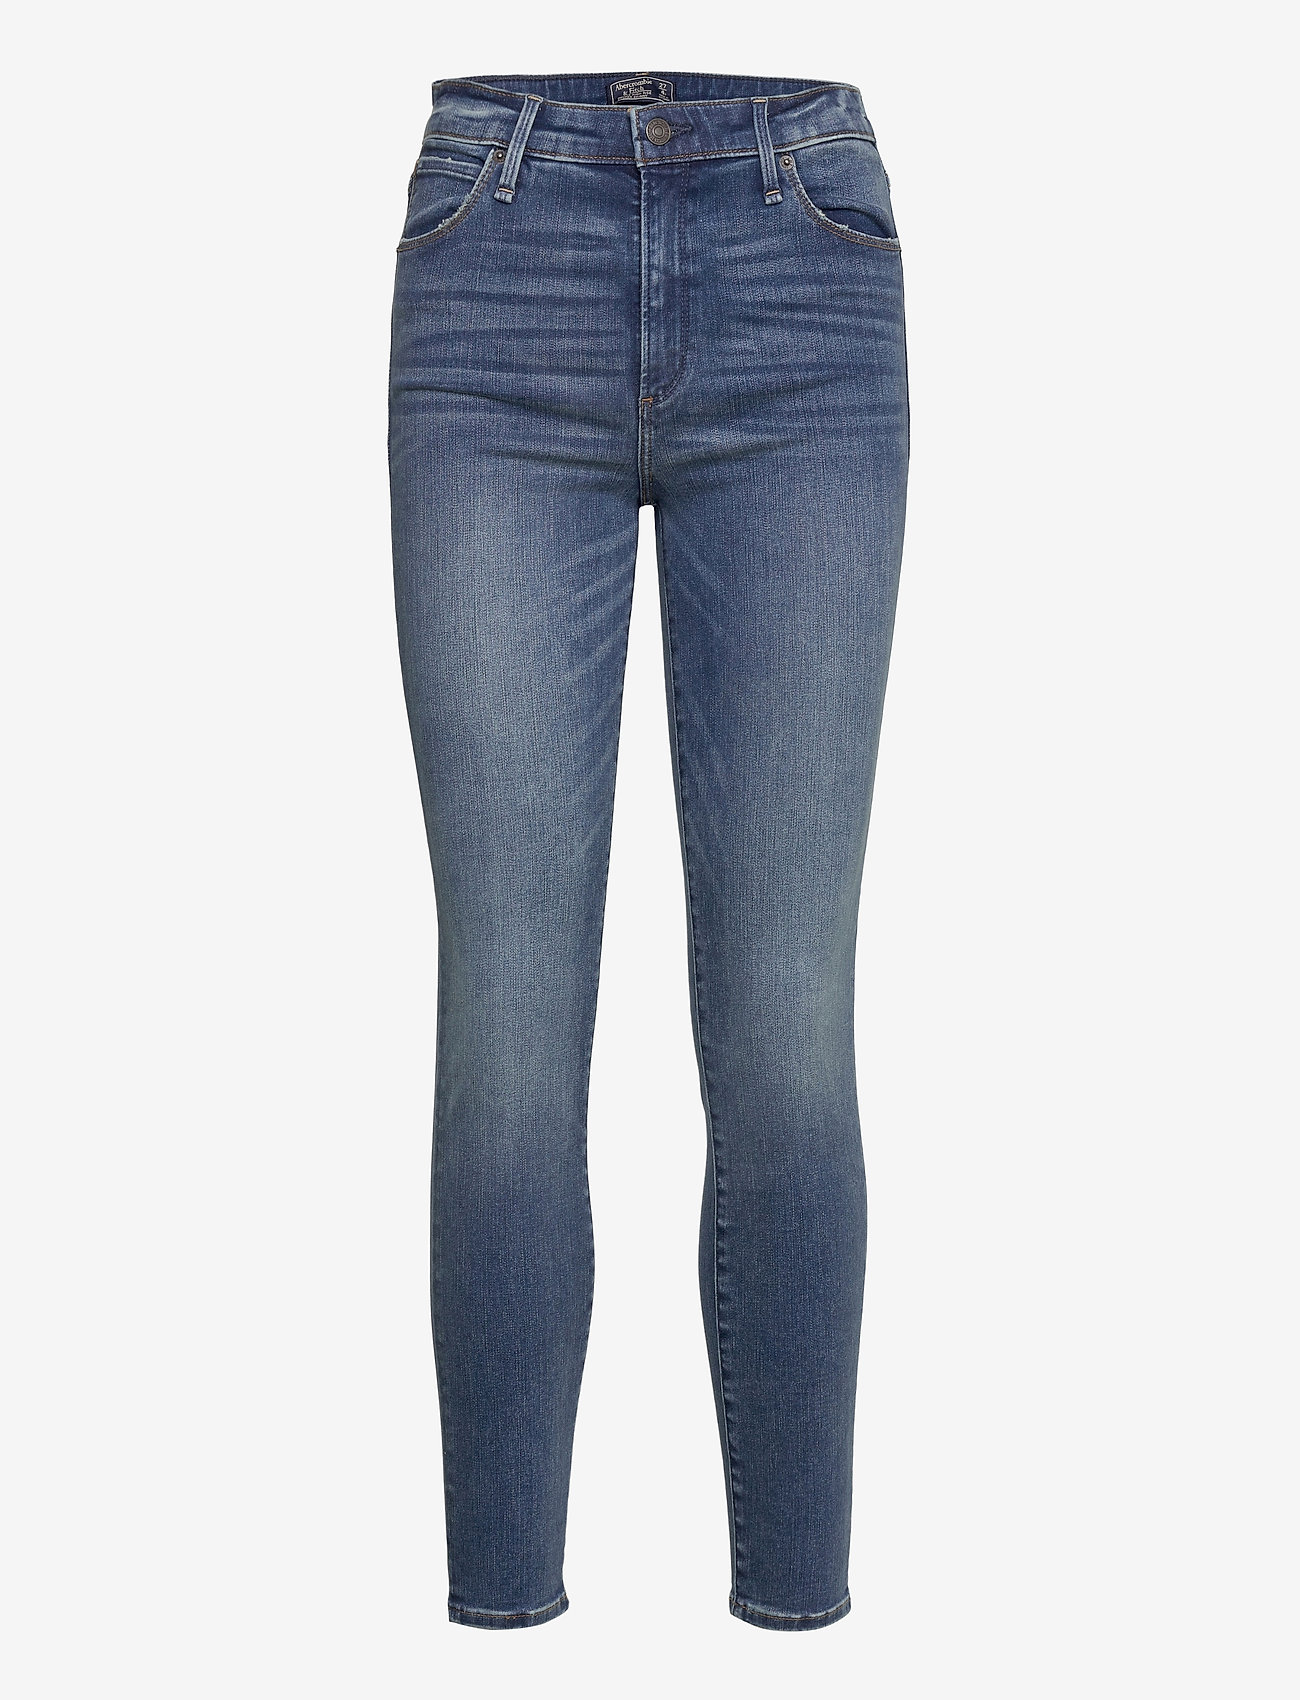 abercrombie & fitch women's jeans